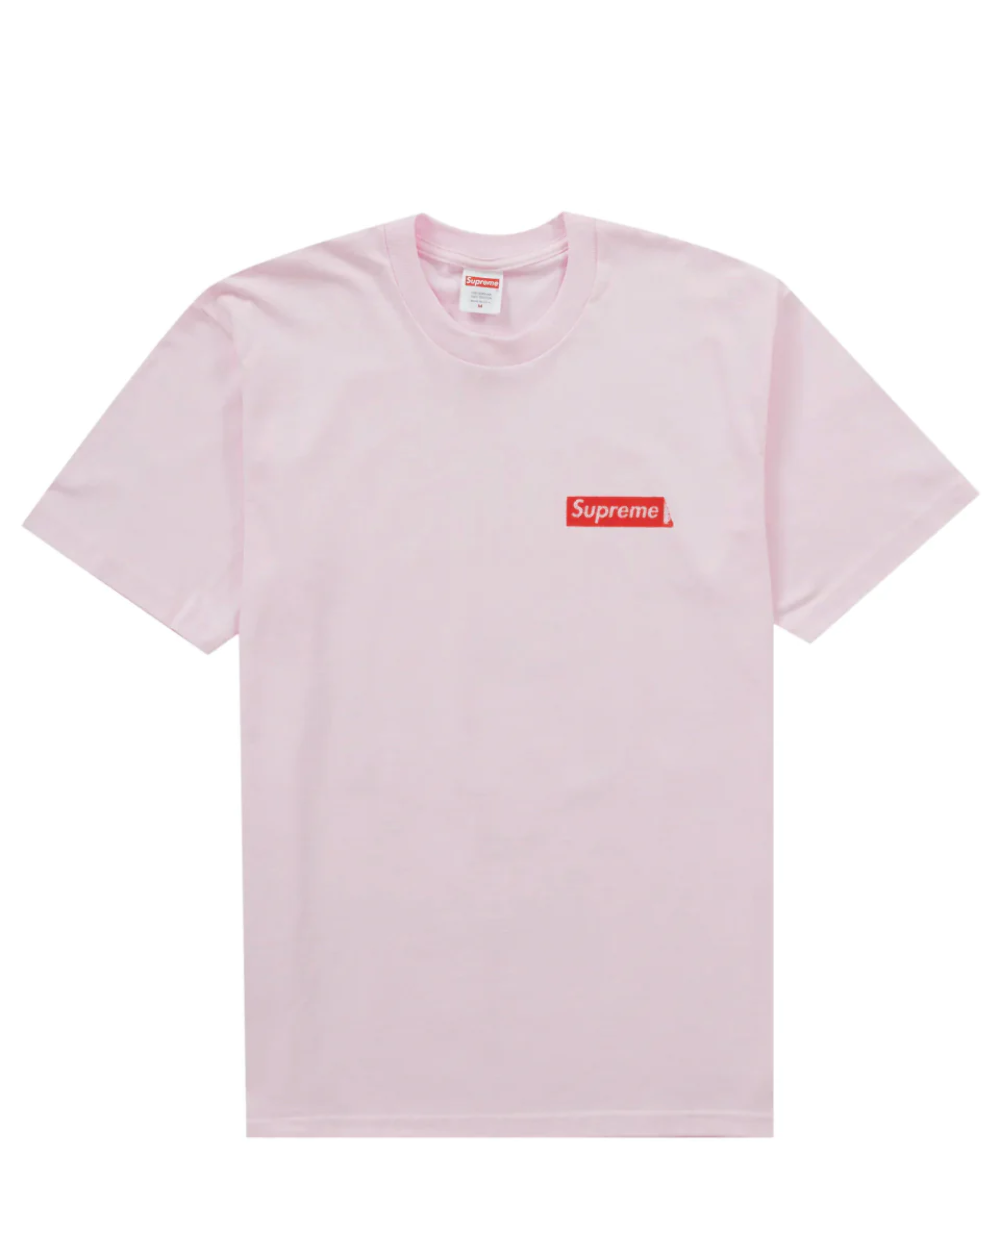 Supreme Body Snatchers Tee Size L (New) Light Pink Color